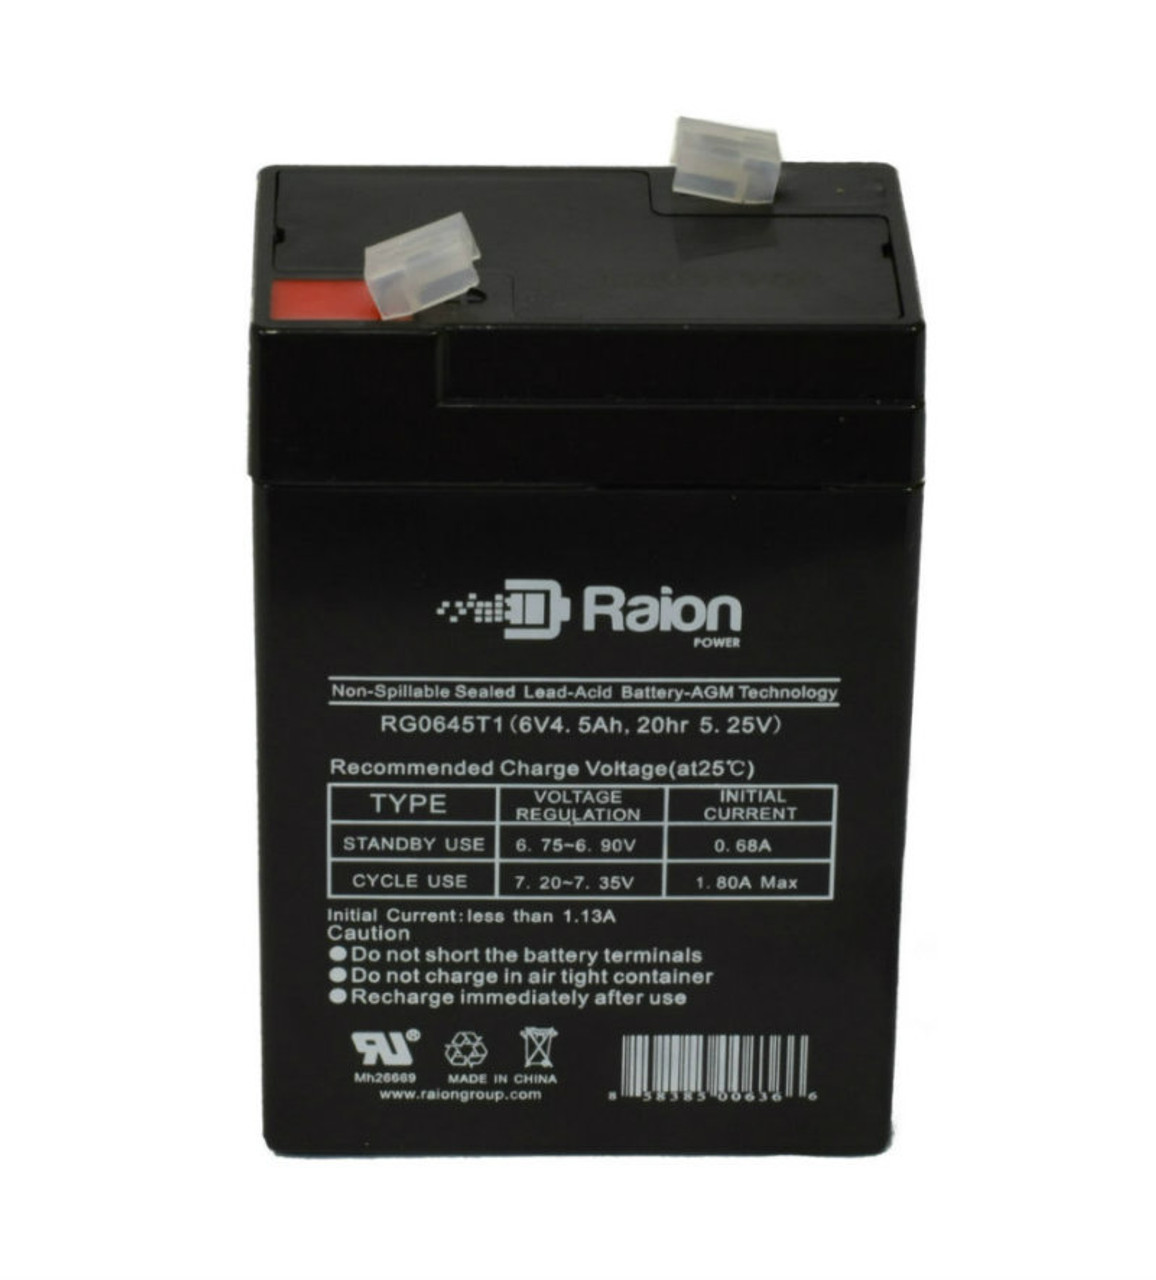 Raion Power RG0645T1 Replacement Battery Cartridge for Holophane M2